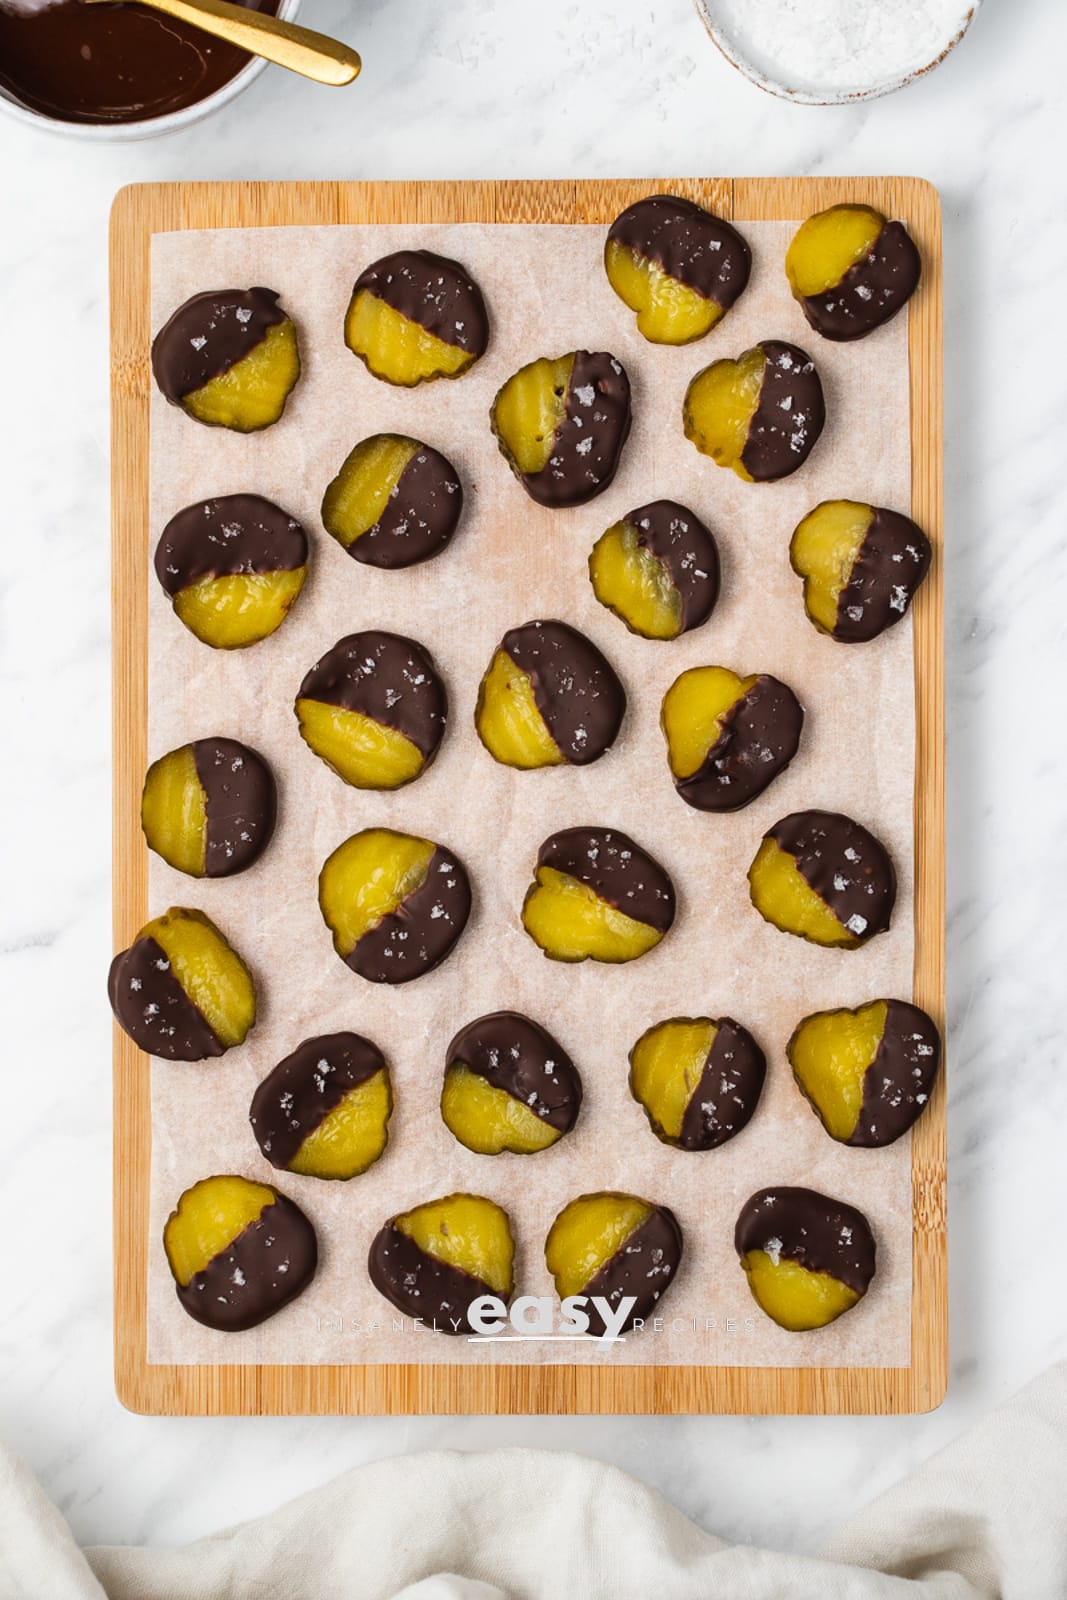 top view photo of pickles dipped in chocolate and sprinkled with salt, on a sheet of parchment paper on a wooden cutting board, with a white bowl of melted chocolate and a white bowl of salt above the board, and a white kitchen towel below the board